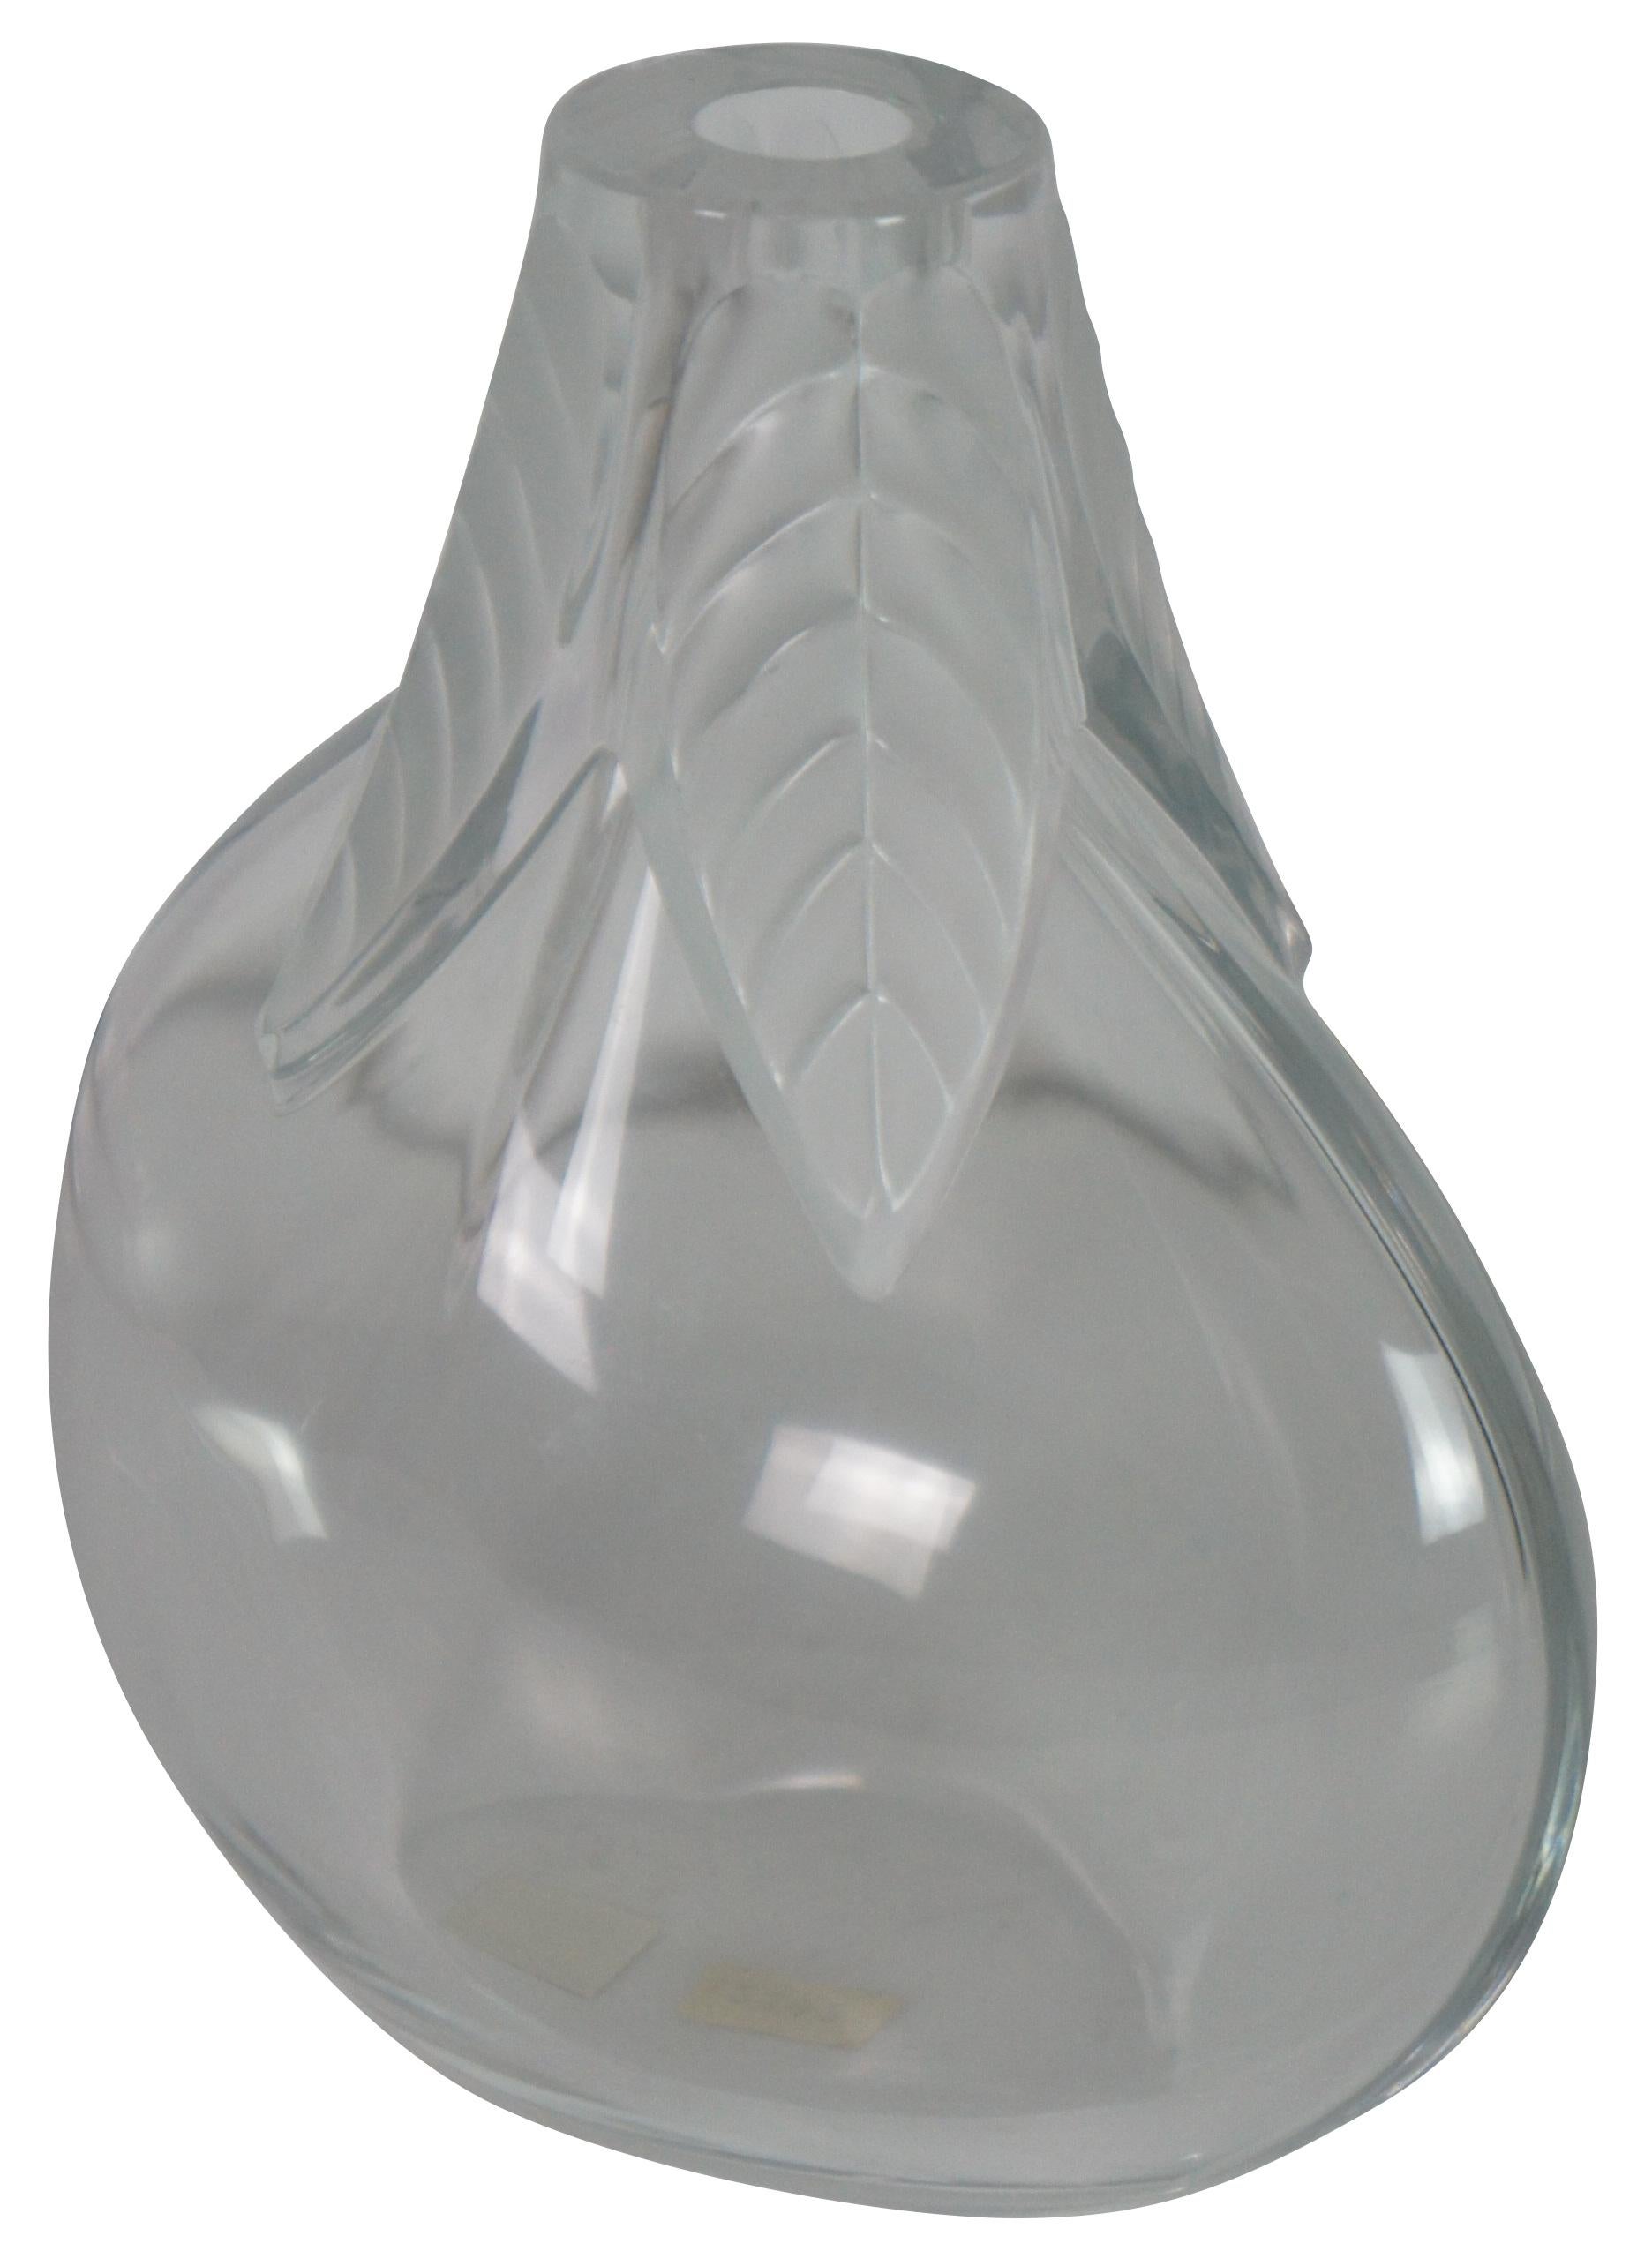 Vintage Lalique France Osumi Leaf crystal bottle shaped vase with a border of frosted leaves around the mouth. 12302. Measure: 7